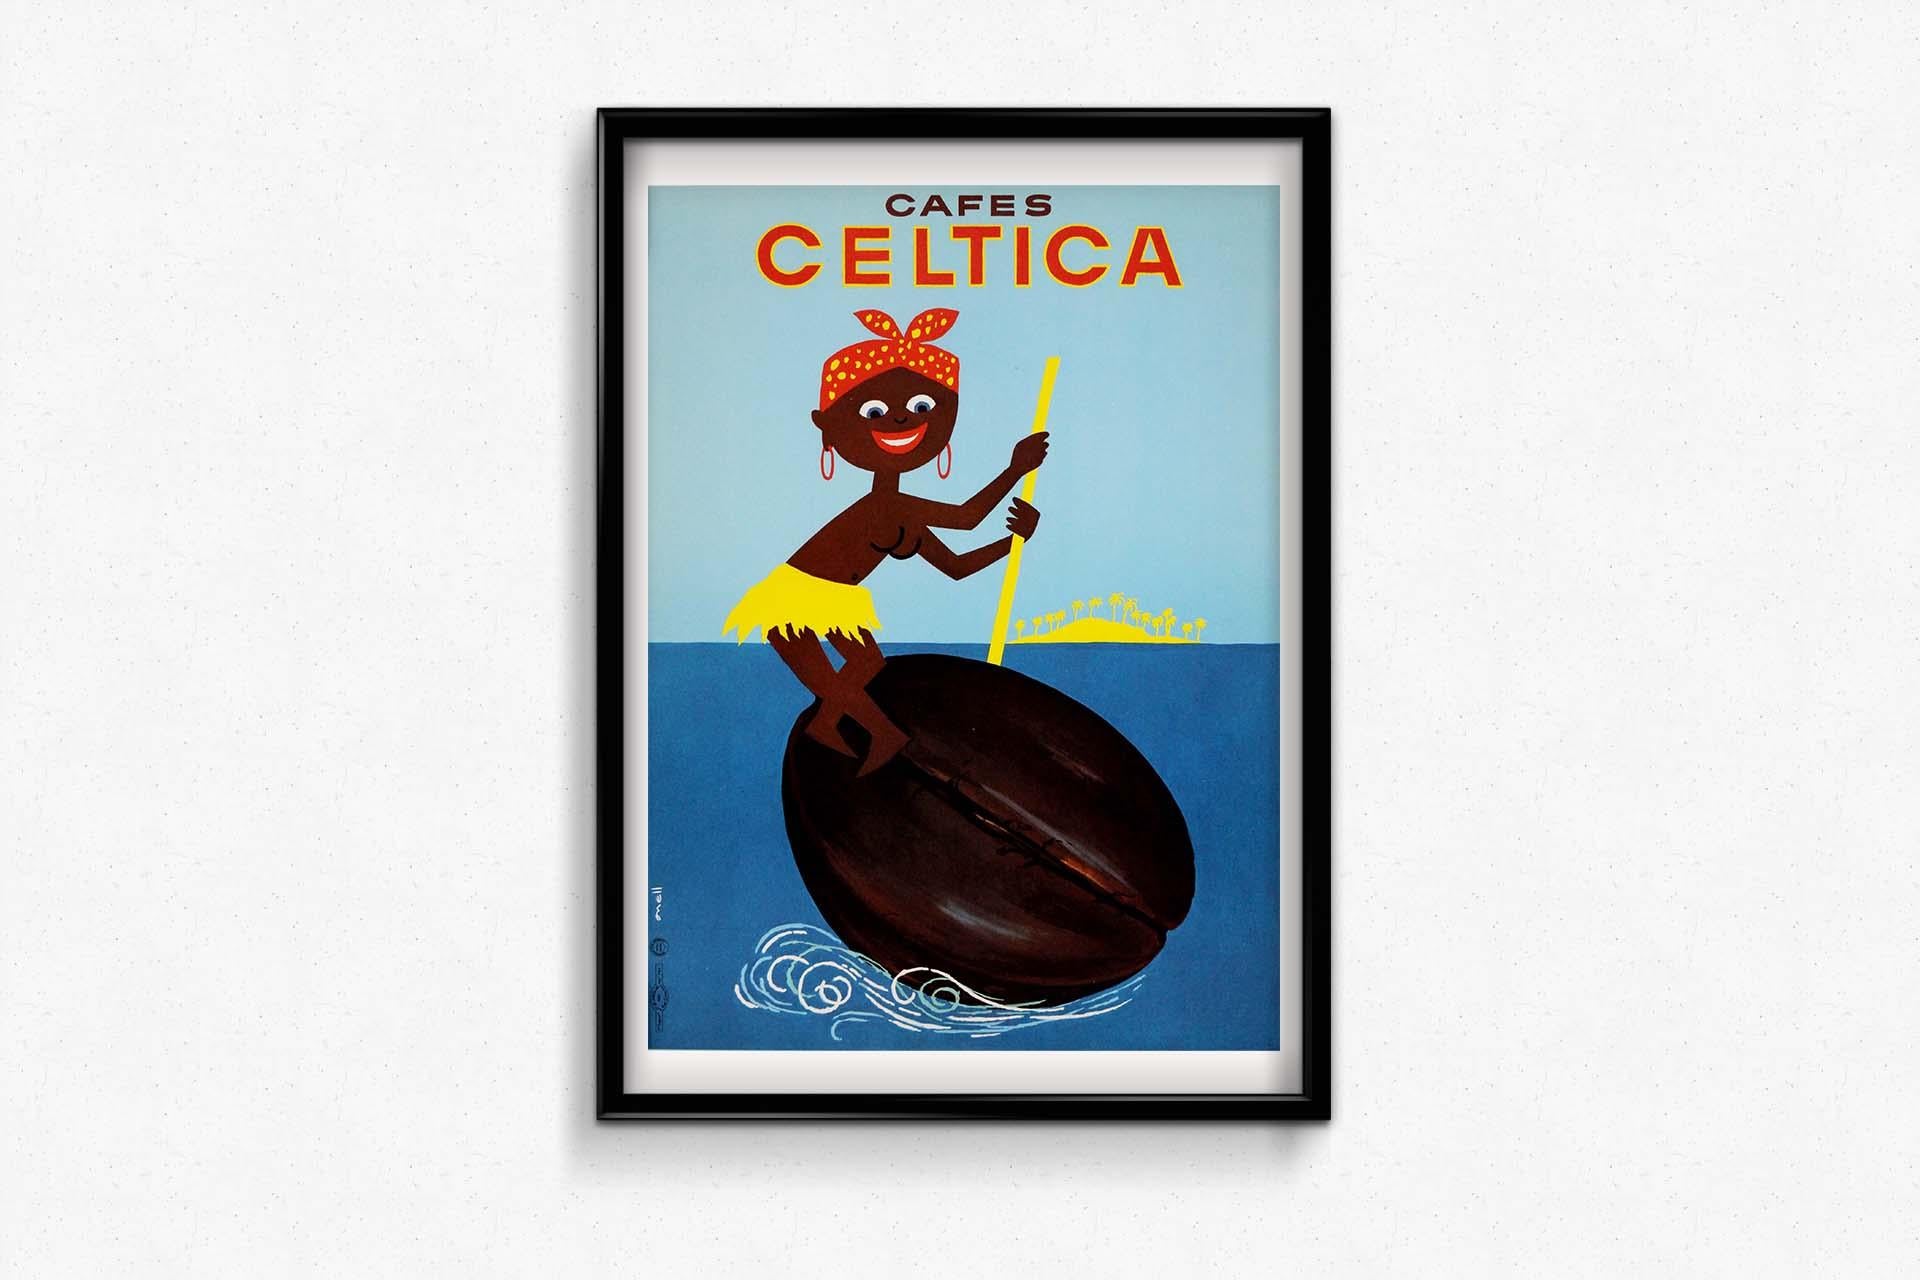 Circa 1960 original poster by Onell for Cafes Celtica